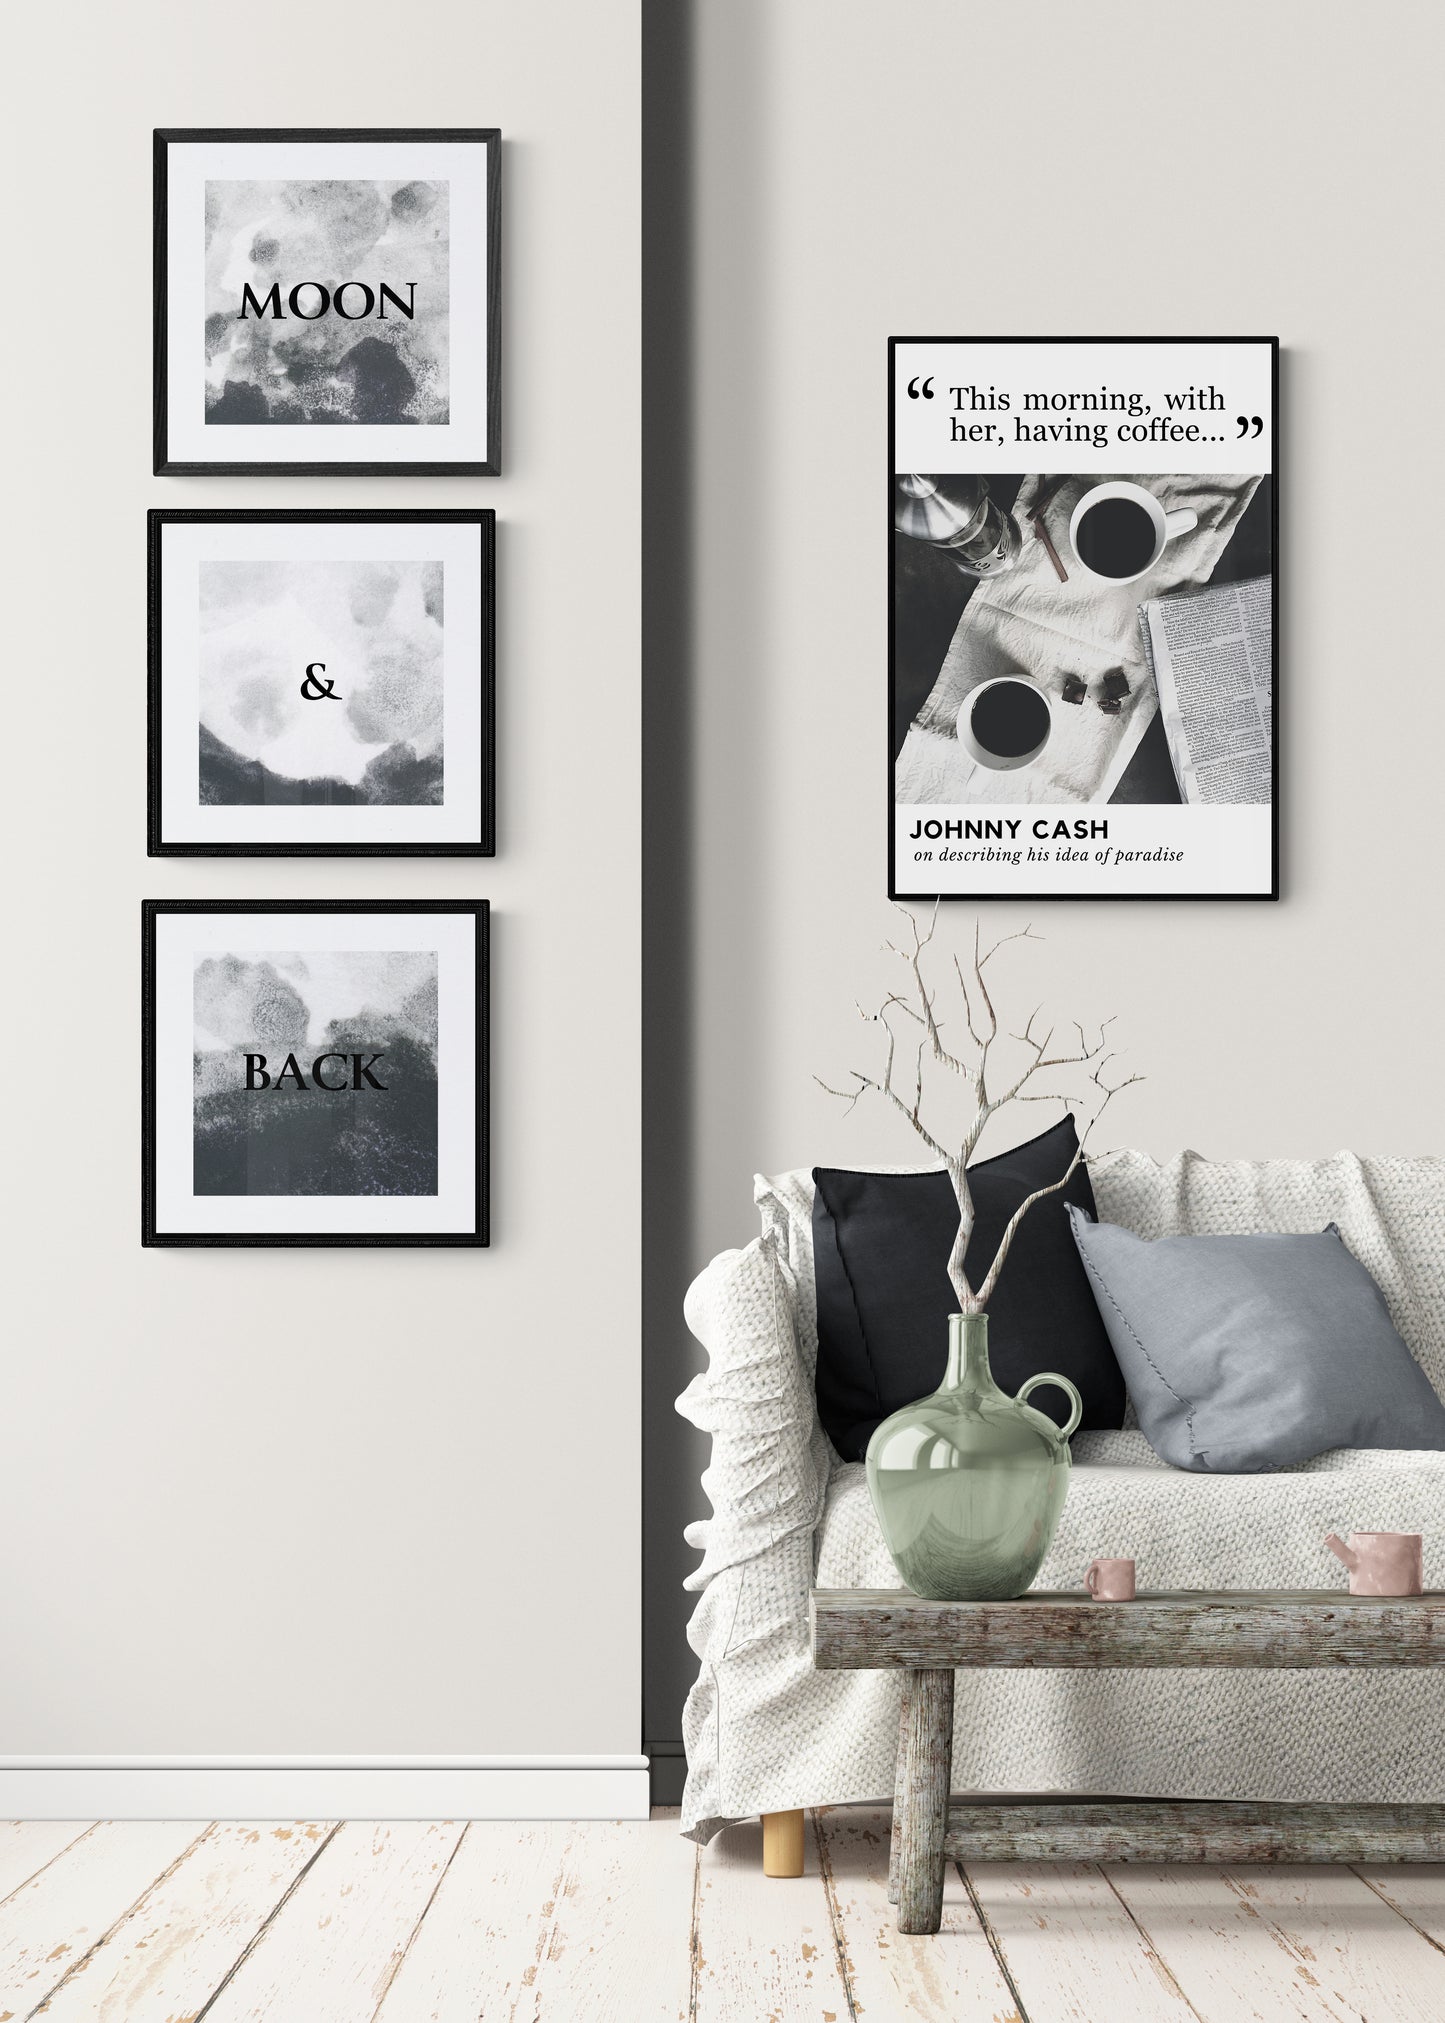 Moon and back art print in black and white for first paper couple anniversary 